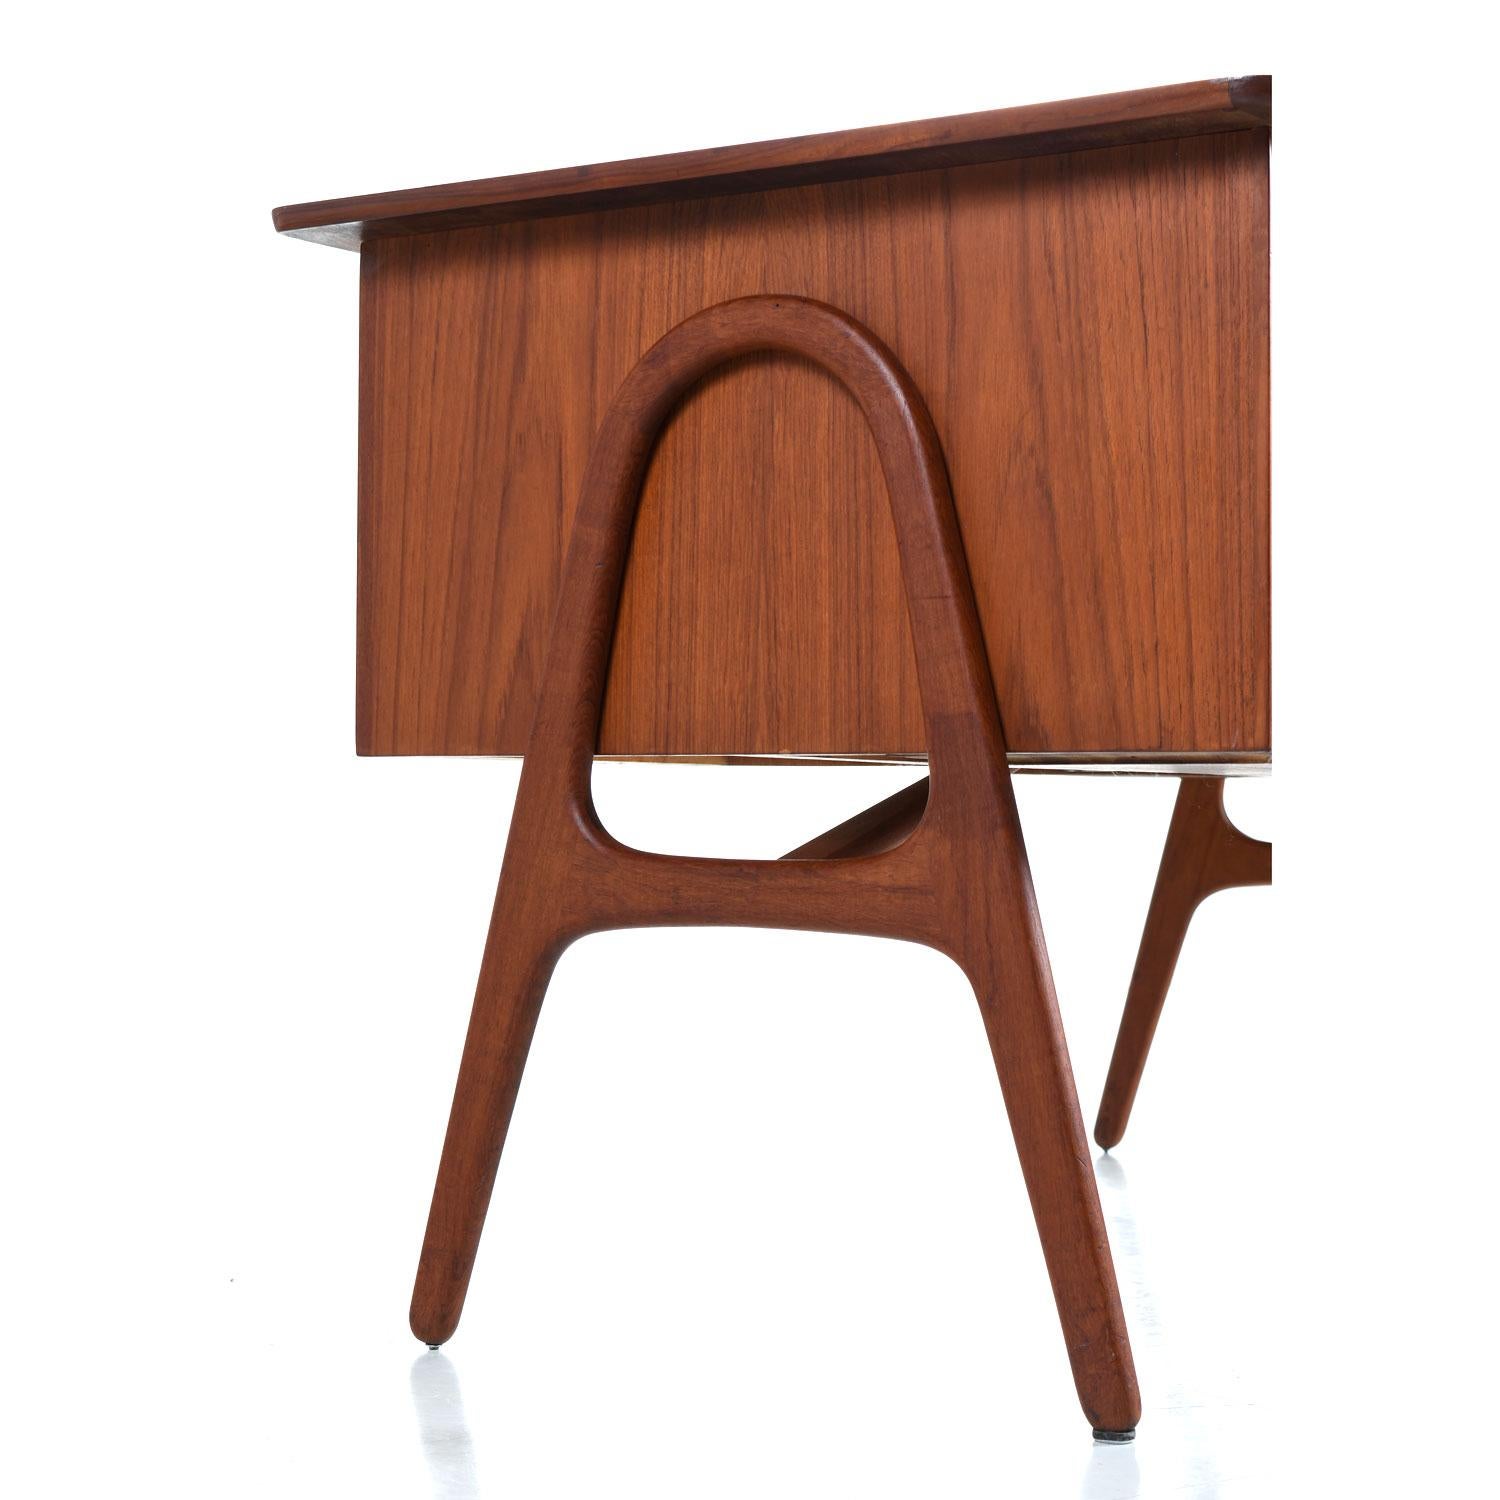 Mid-Century Modern Danish Teak Curved Top Desk with Bookcase Cabinet Front by Svend Madsen